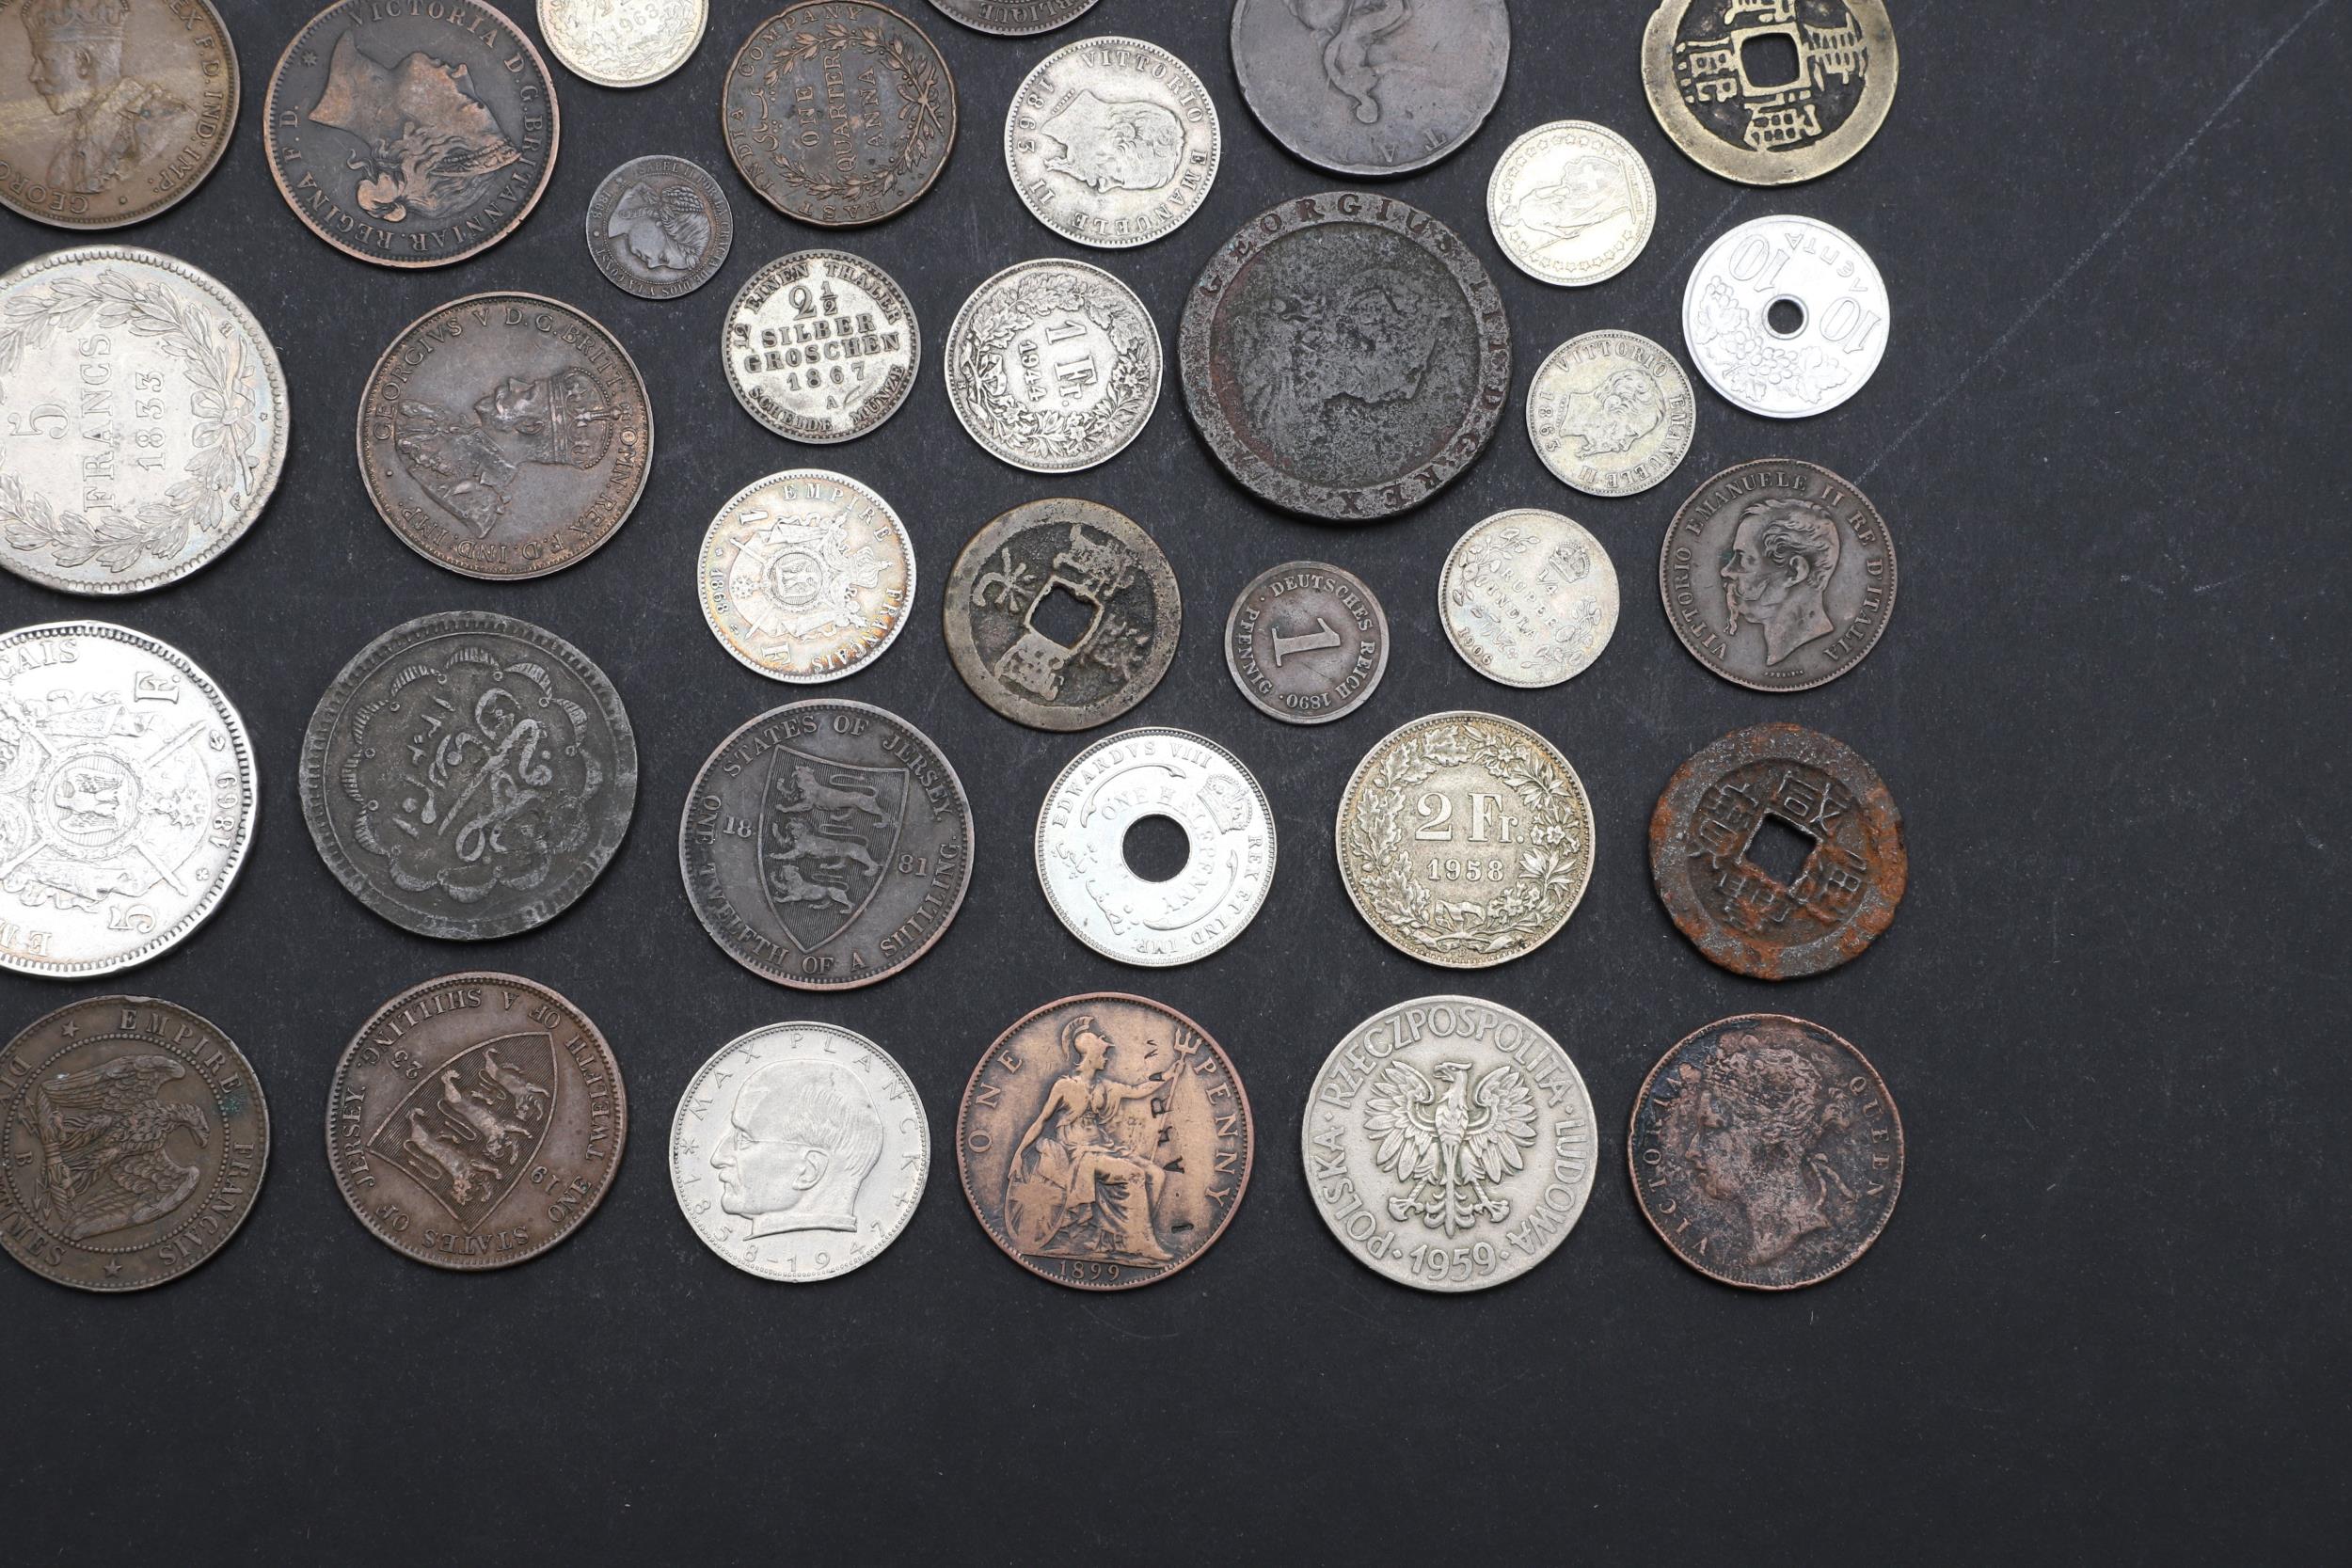 A COLLECTION OF WORLD COINS INCLUDING A NAPOLEON III 5 FRANC COIN. - Image 5 of 5